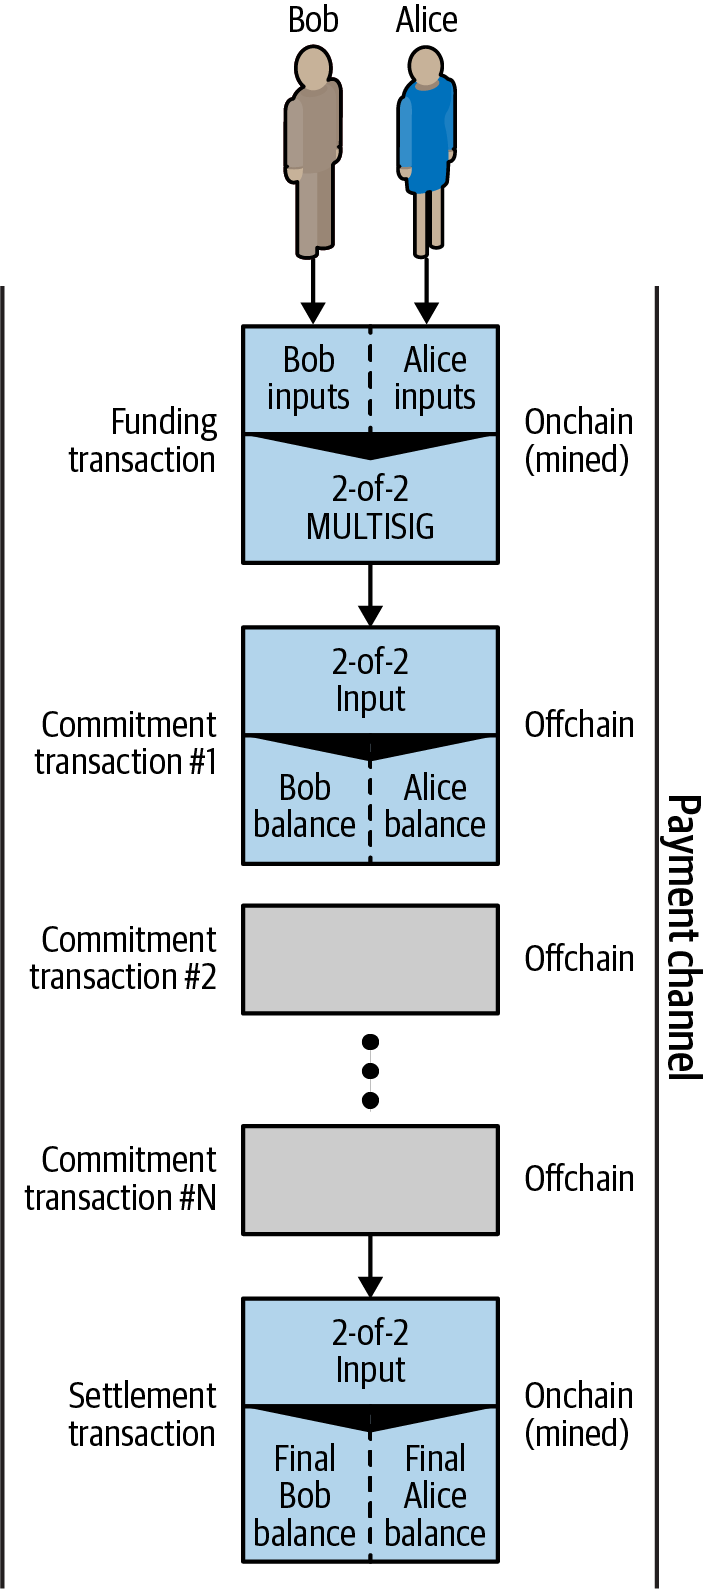 A payment channel between Bob and Alice, showing the funding, commitment, and settlement transactions